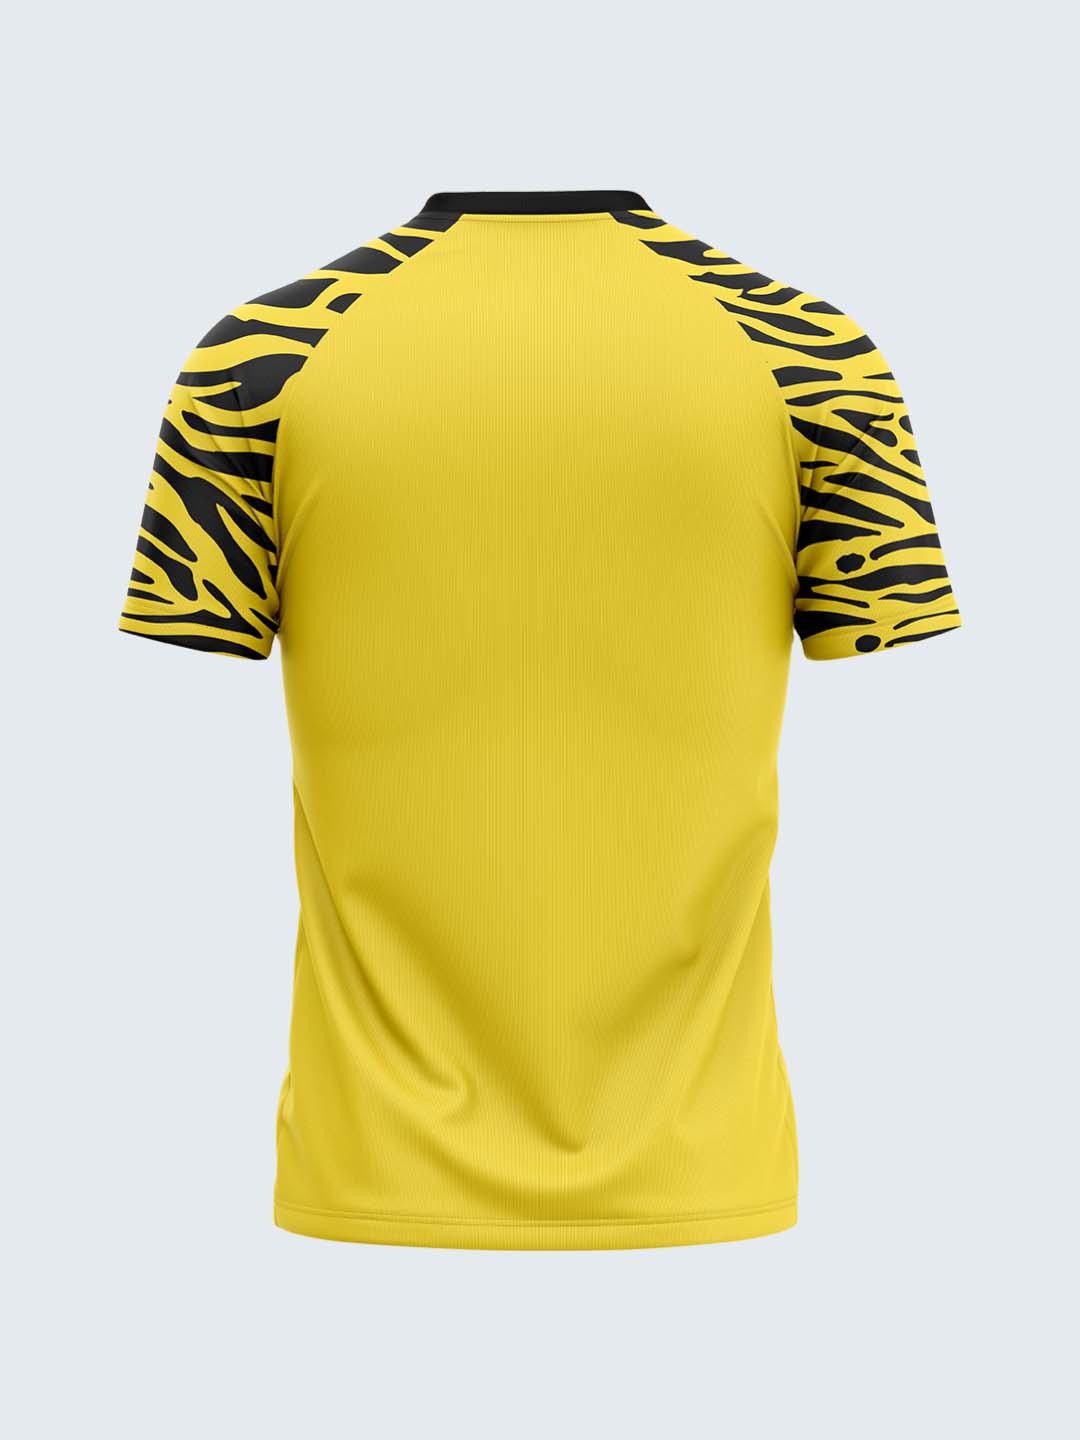 Customise Yellow Hockey Jersey - 2147YW - Front